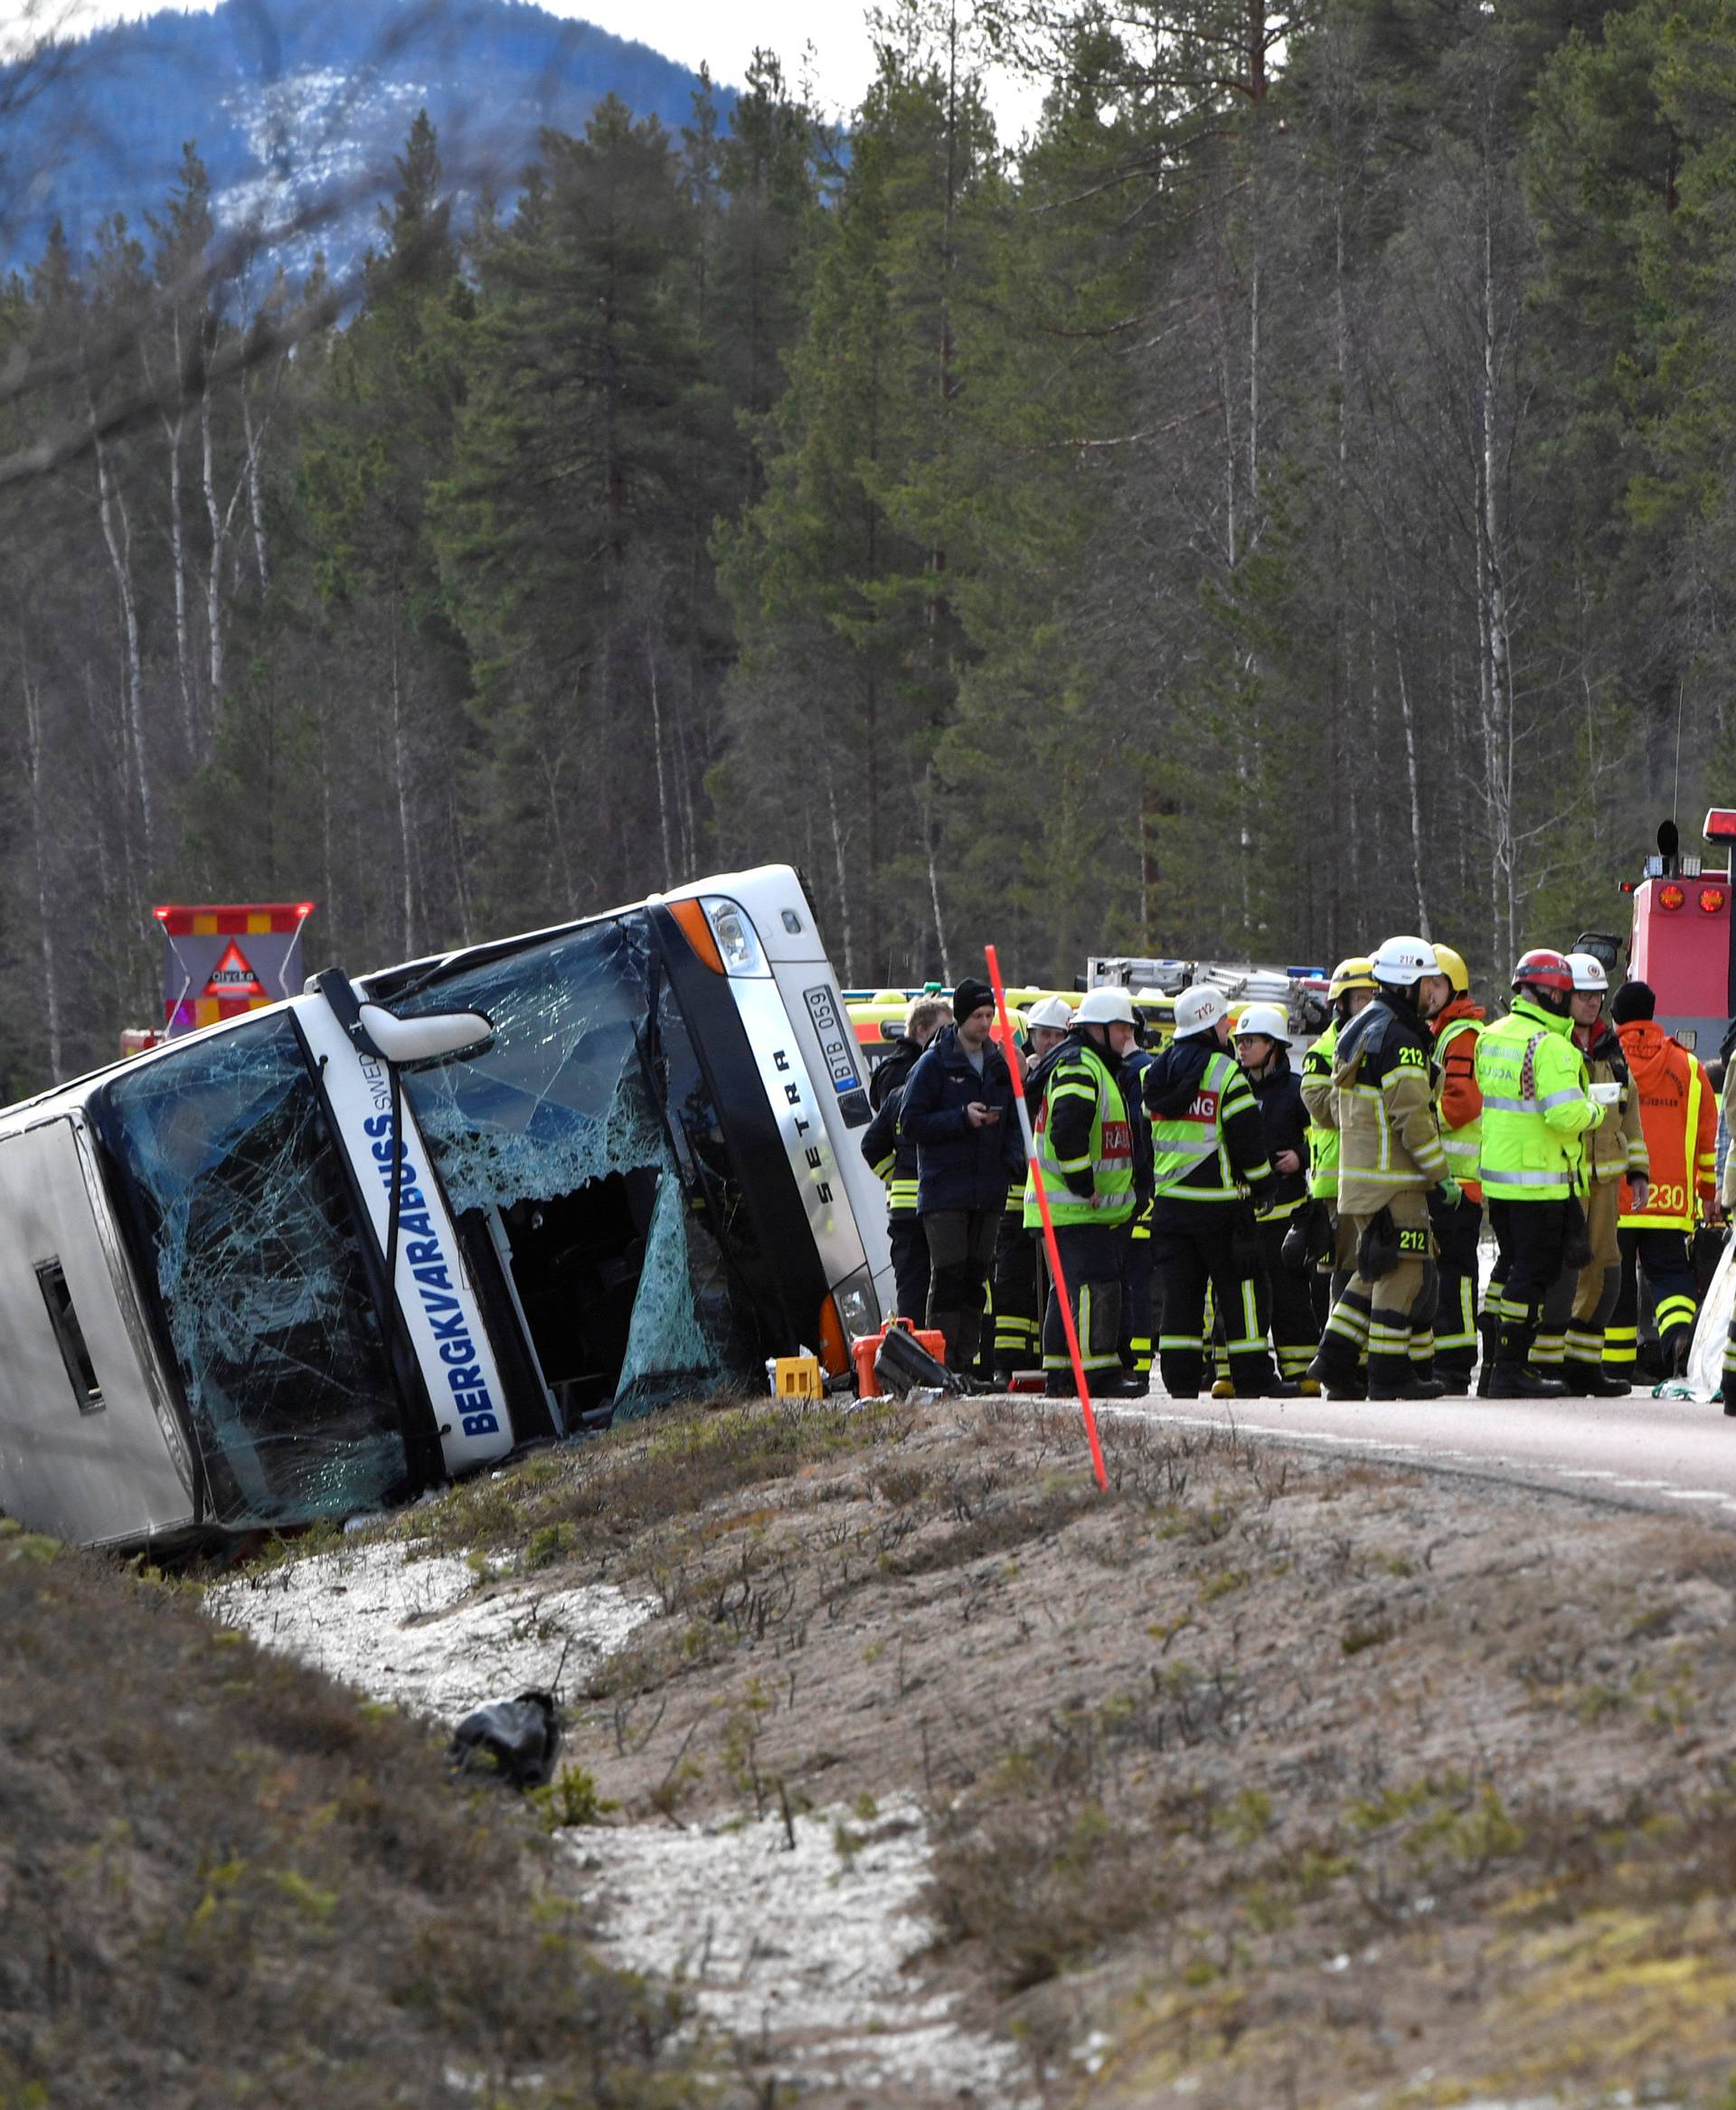 Rescue workers are seen at the site where a bus carrying school children and adults rolled over on a road close to the town of Sveg